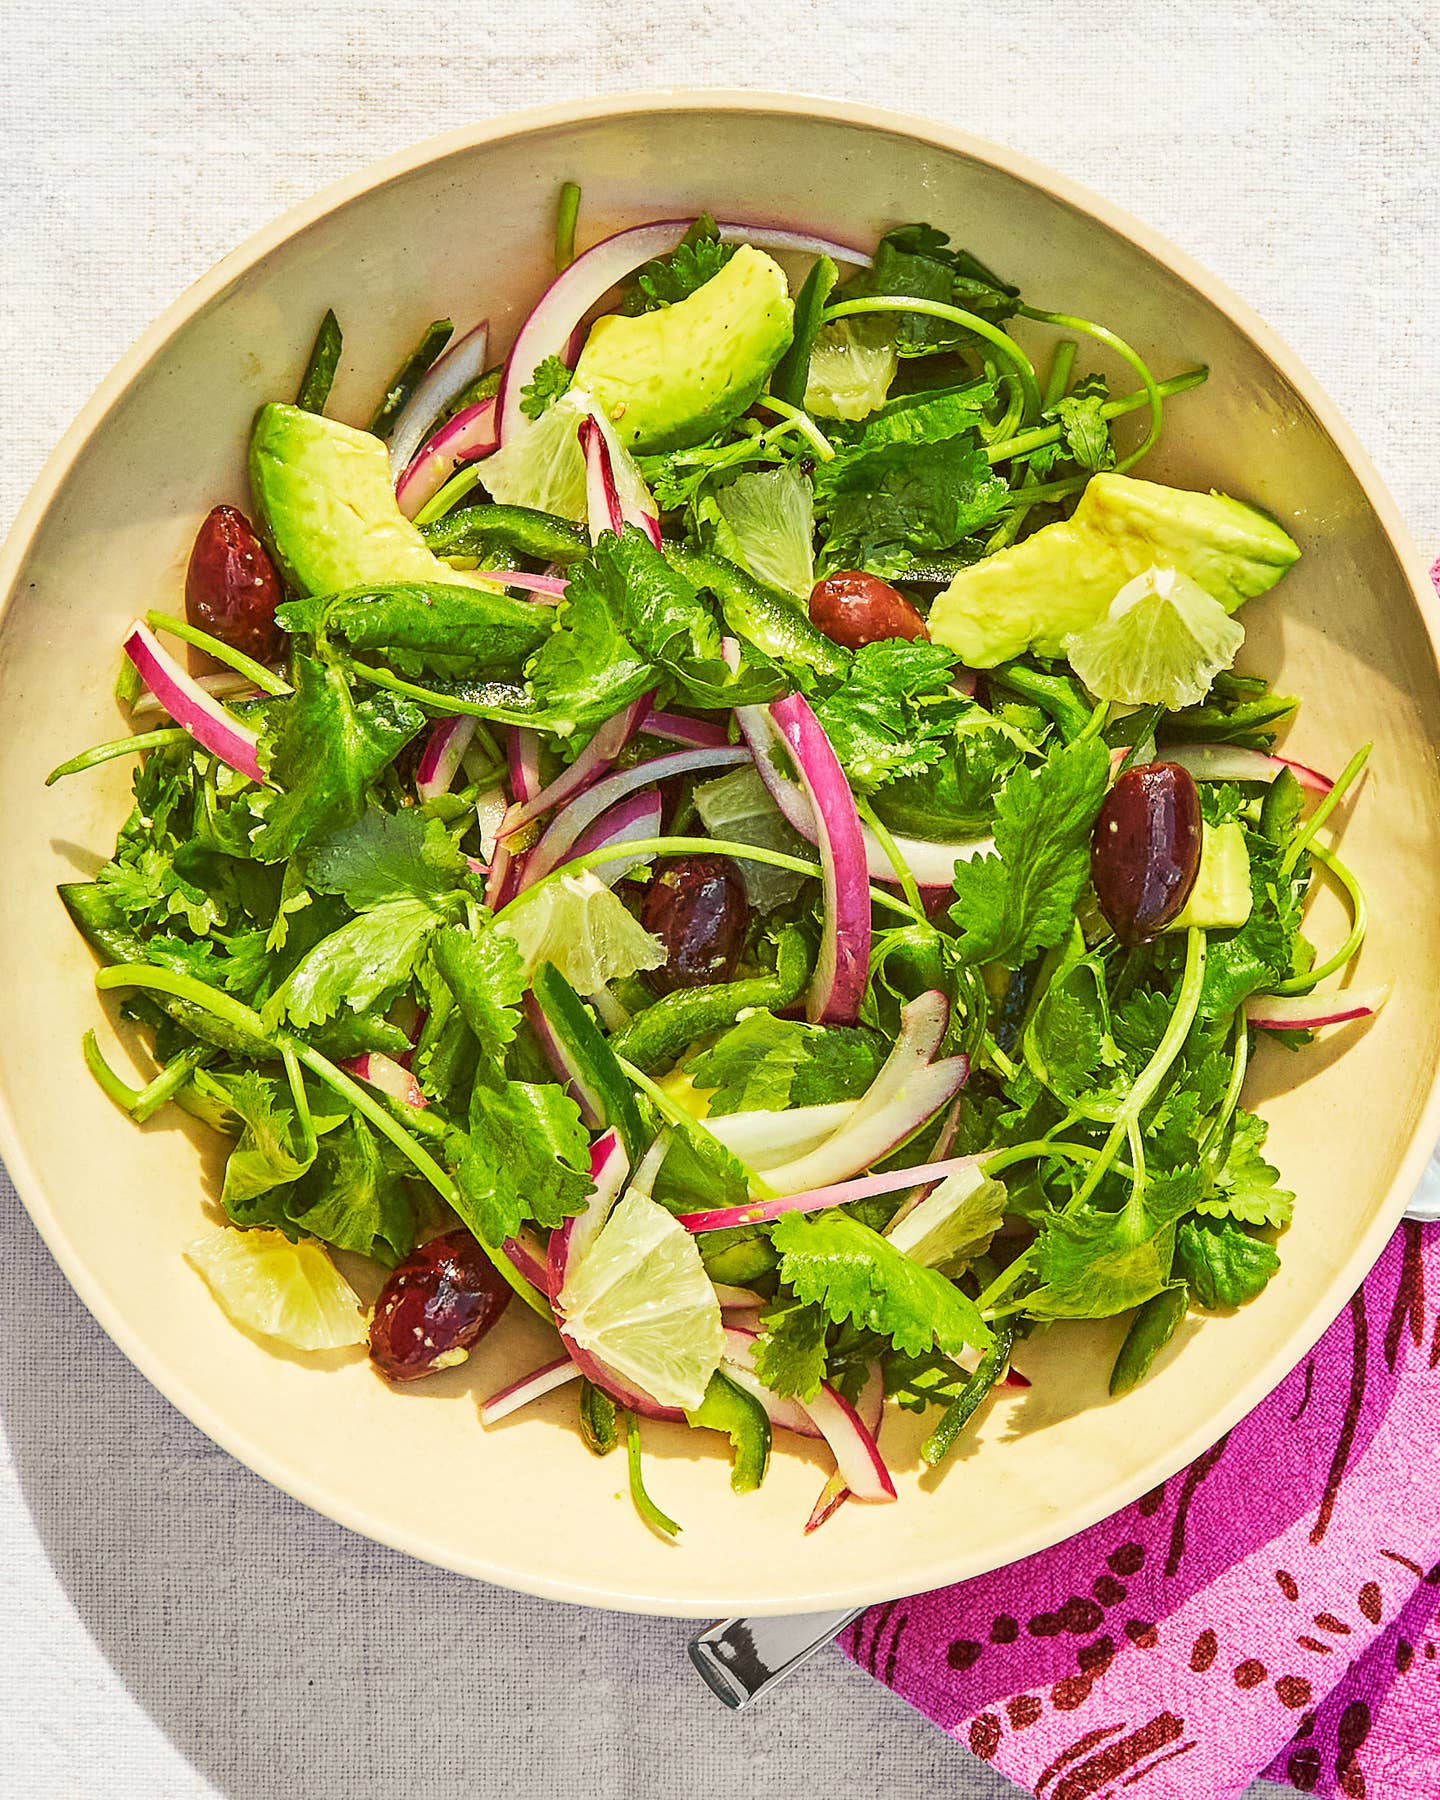 Cilantro Salad with Olives, Avocado, and Limes